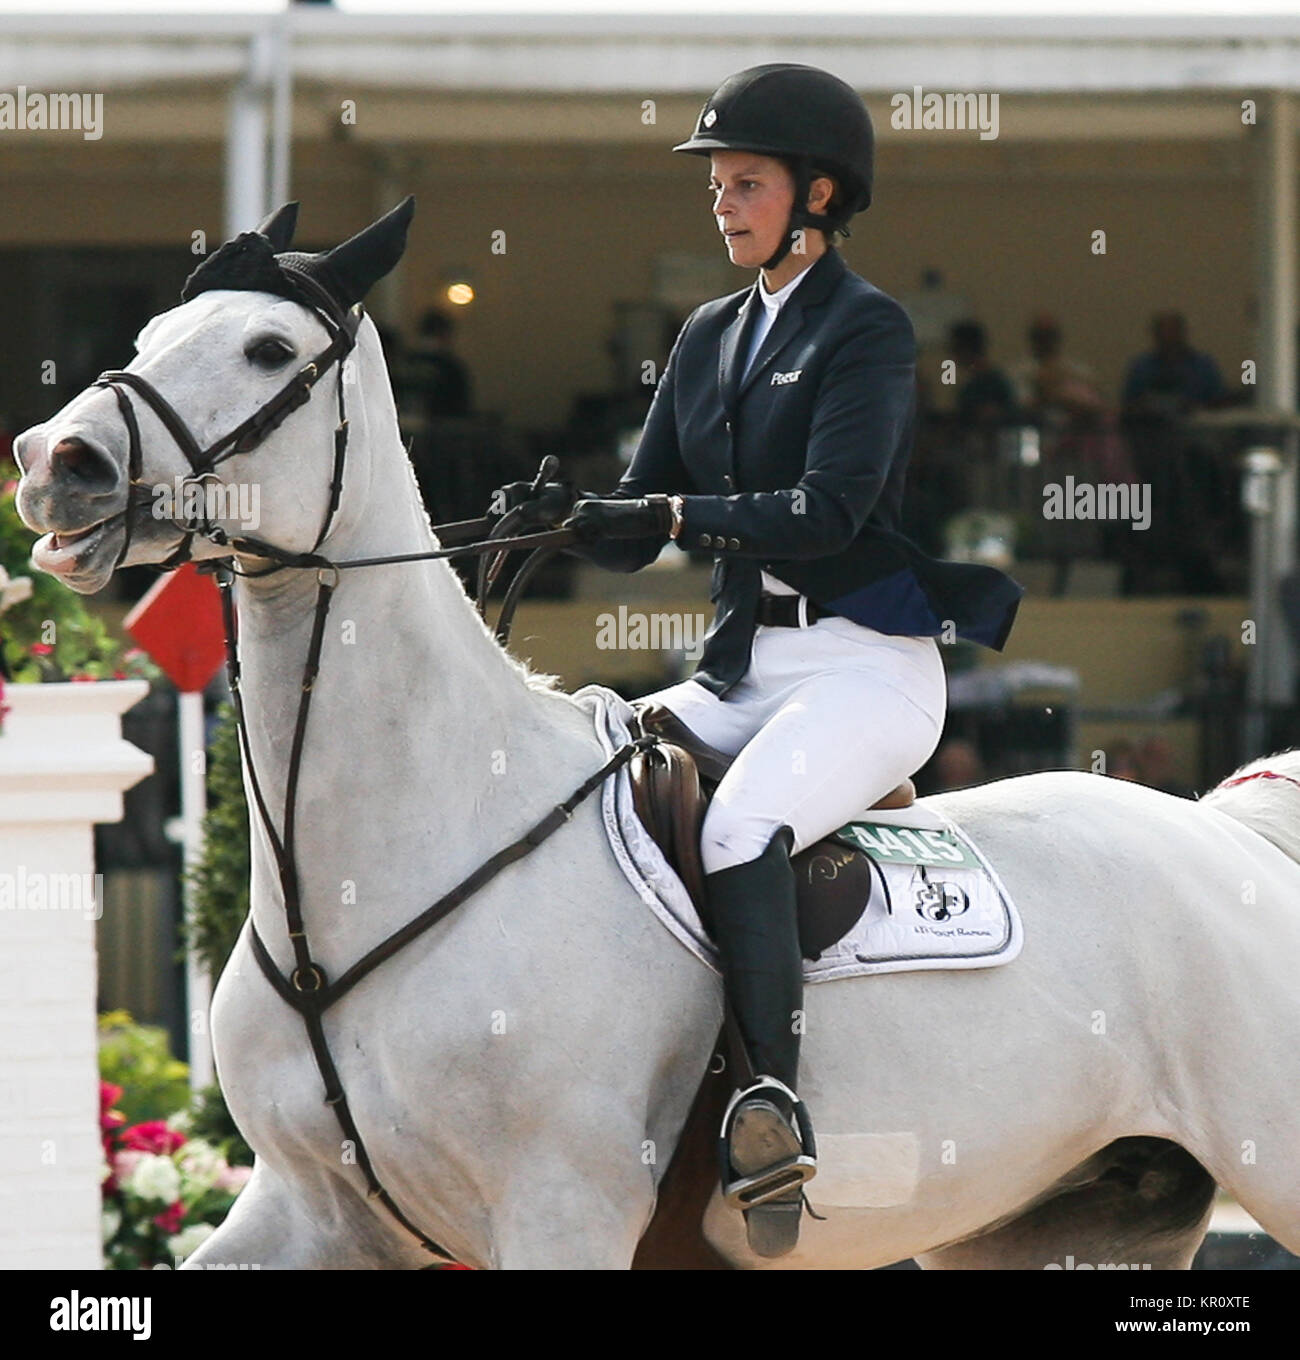 WELLINGTON, FL - JANUARY 26: Athina Onassis Roussel l participtaes in  the FTI Winter Equestrian Festival at the Palm Beach International Equestrian Center on January 26, 2014 in Wellington, Florida   People:  Athina Onassis Roussel Stock Photo